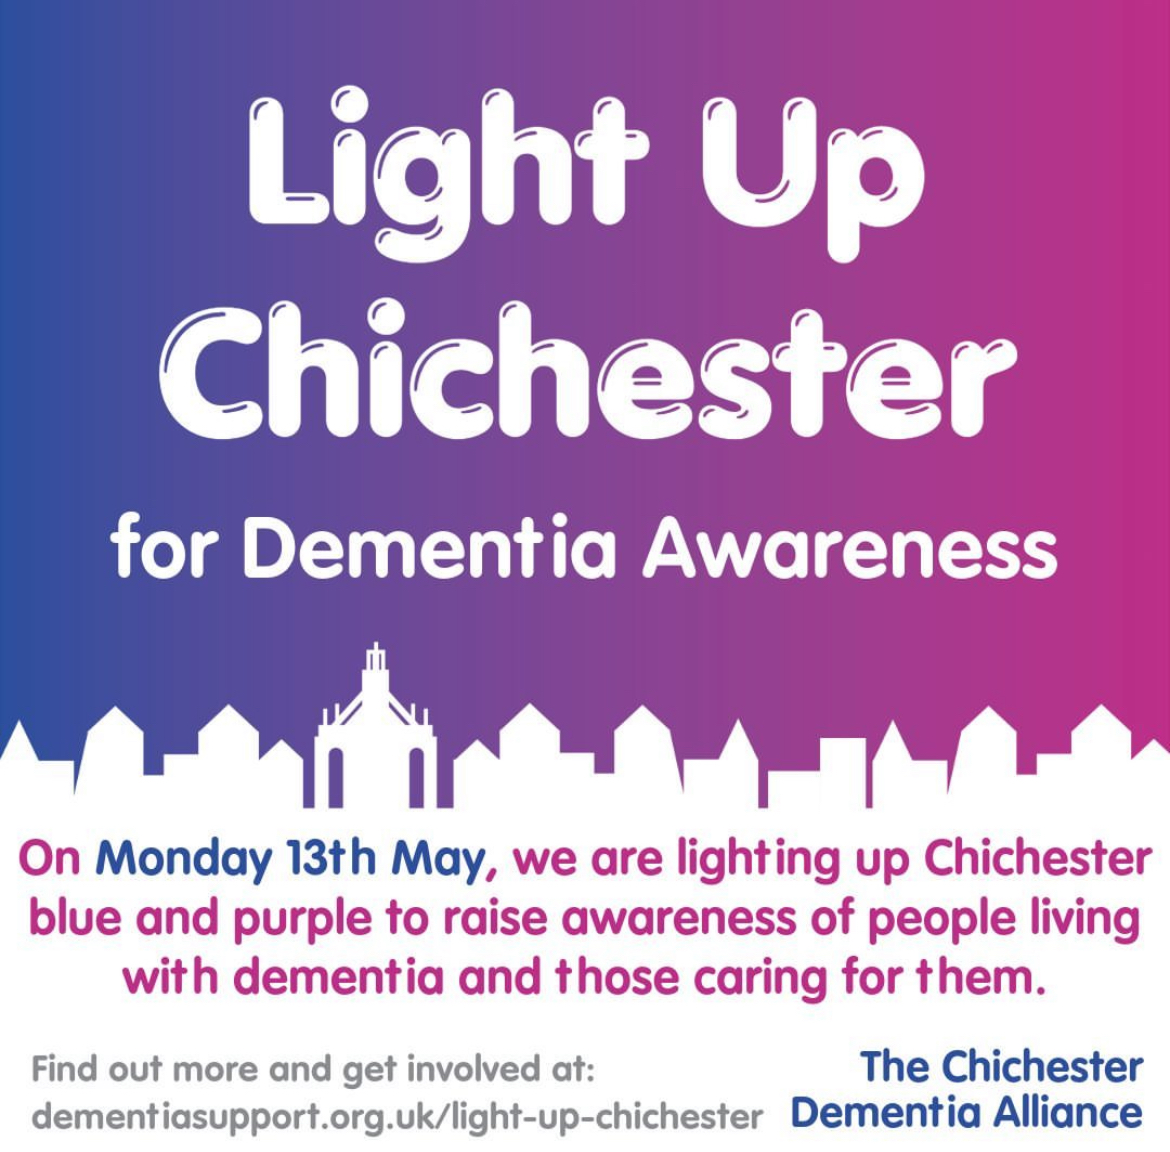 Chichester, are you ready to turn blue and purple? On the evening of Monday 13th May at 8pm, several building's around the city will #lightup in support of #DementiaActionWeek and the 17,500 people affected by #Dementia in West Sussex.